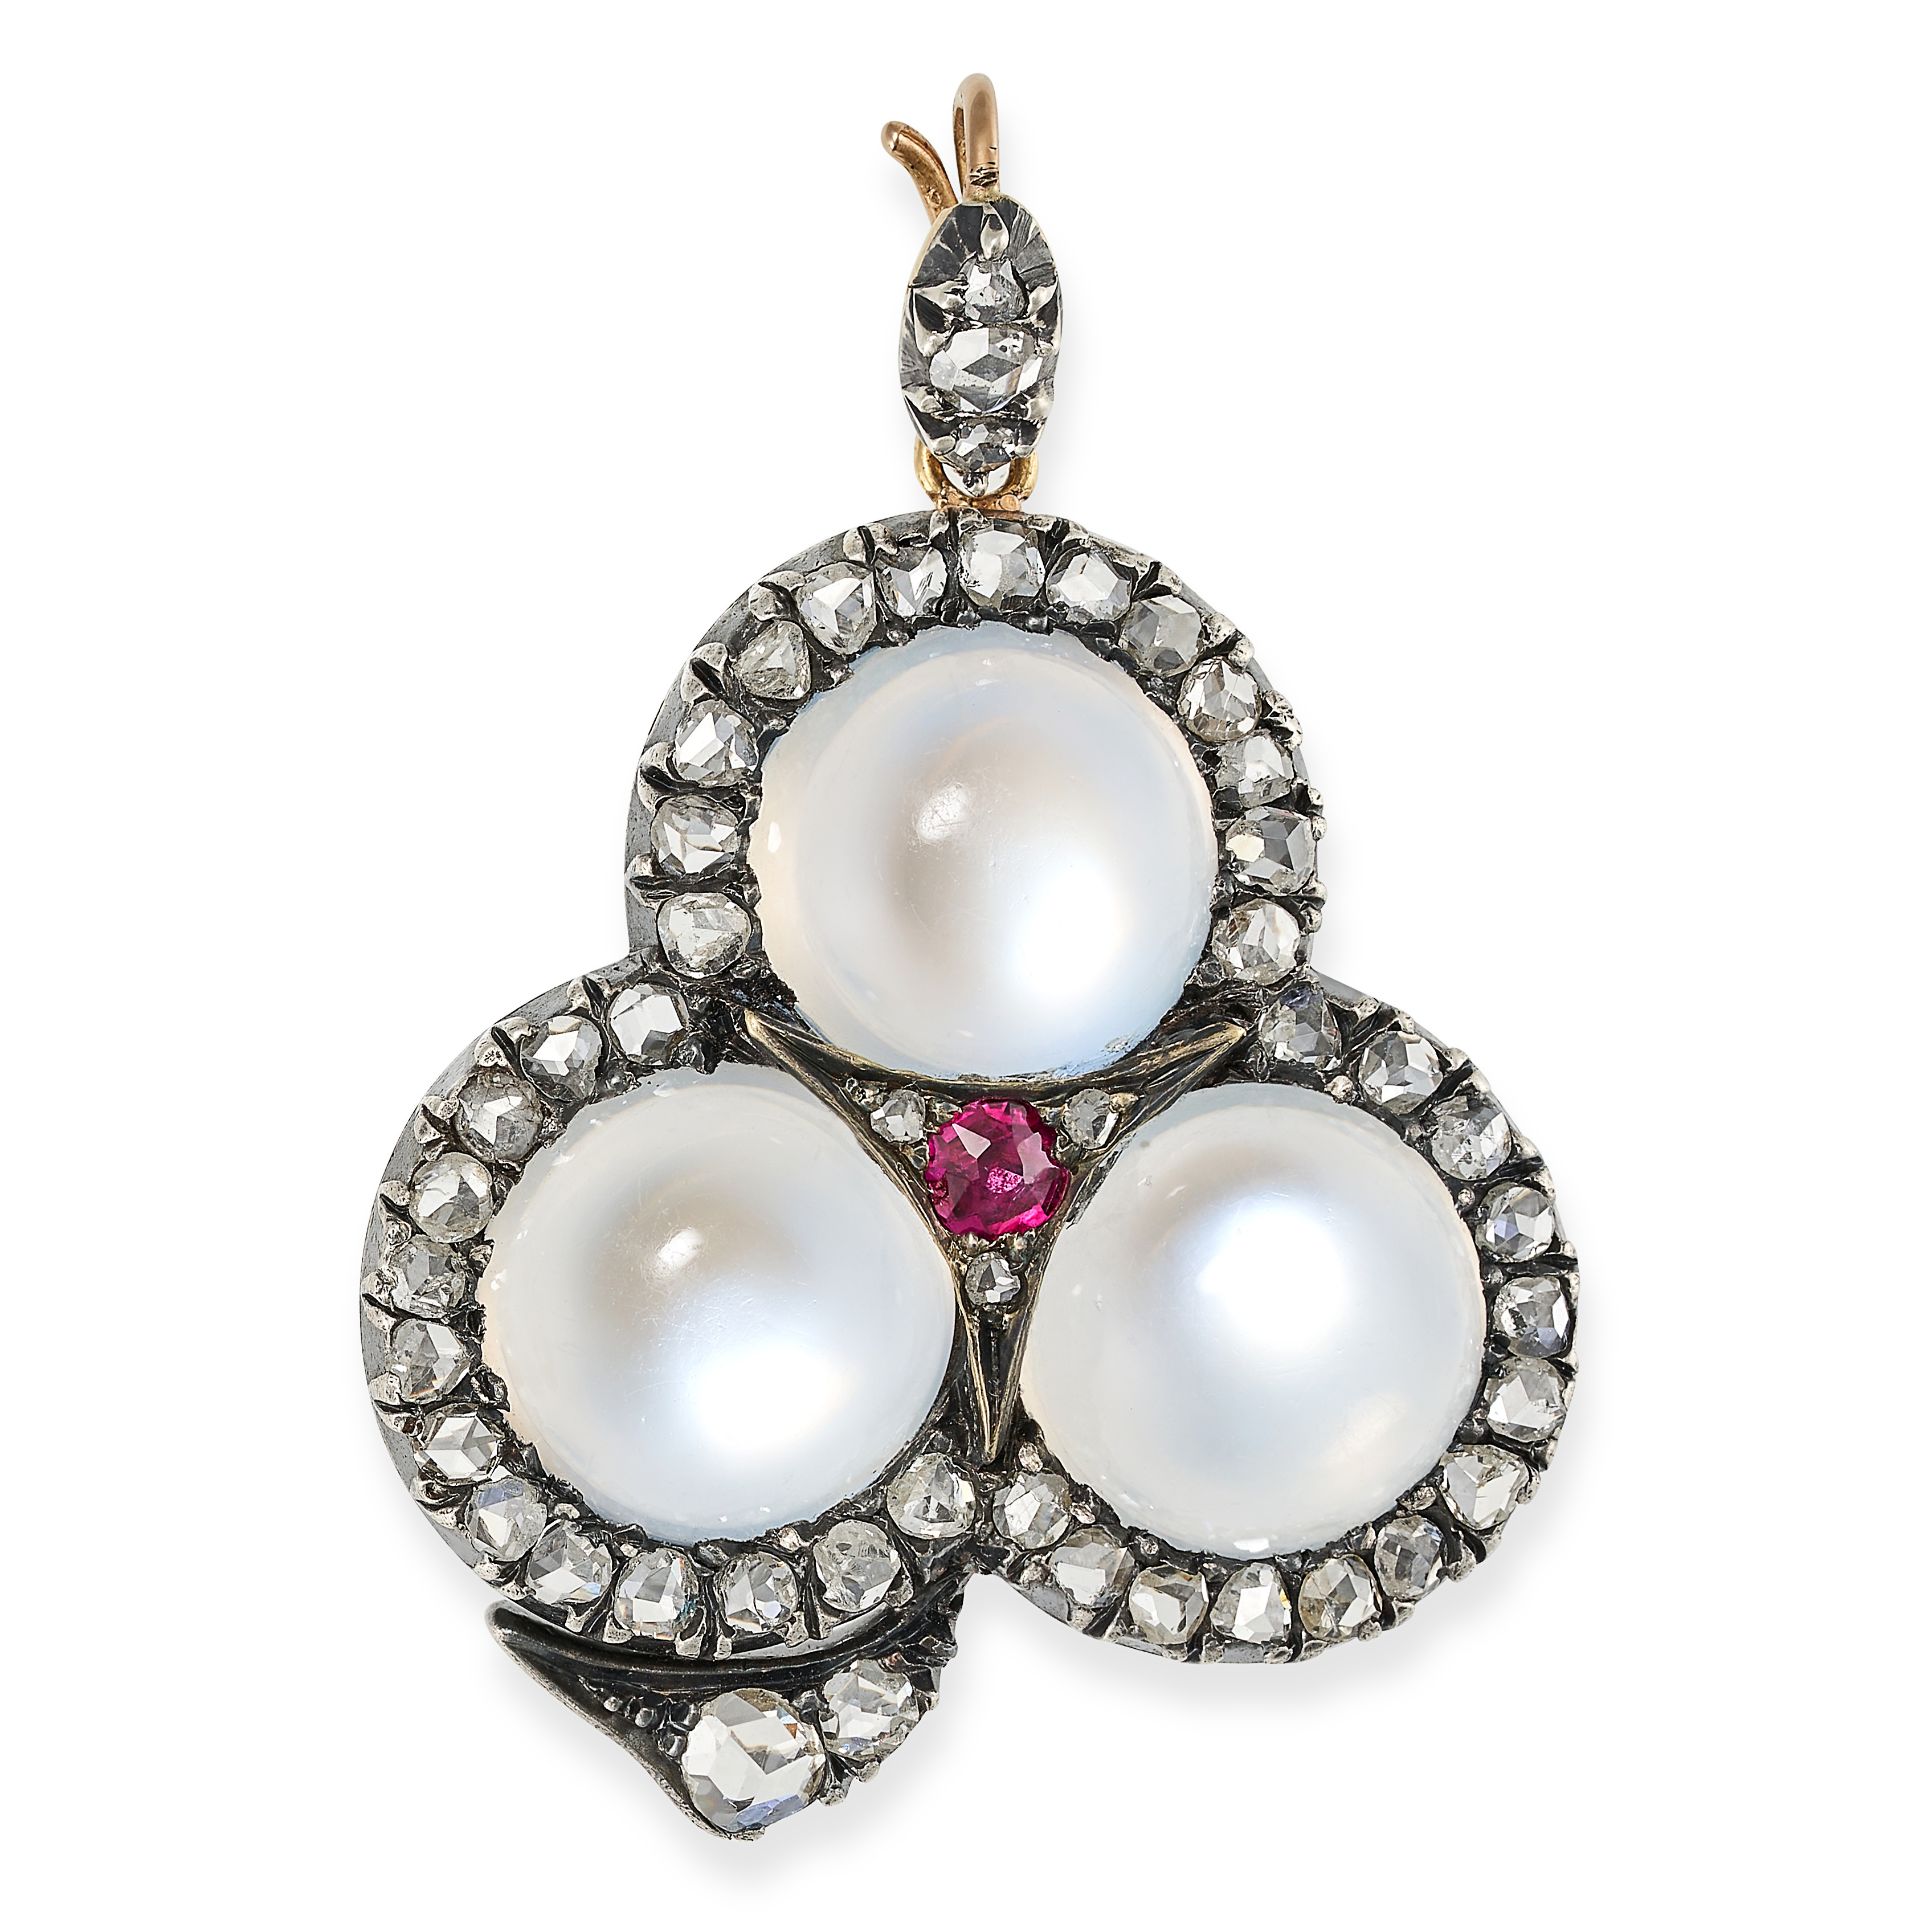 AN ANTIQUE VICTORIAN MOONSTONE, RUBY, AND DIAMOND CLOVER PENDANT in yellow gold and silver, set with